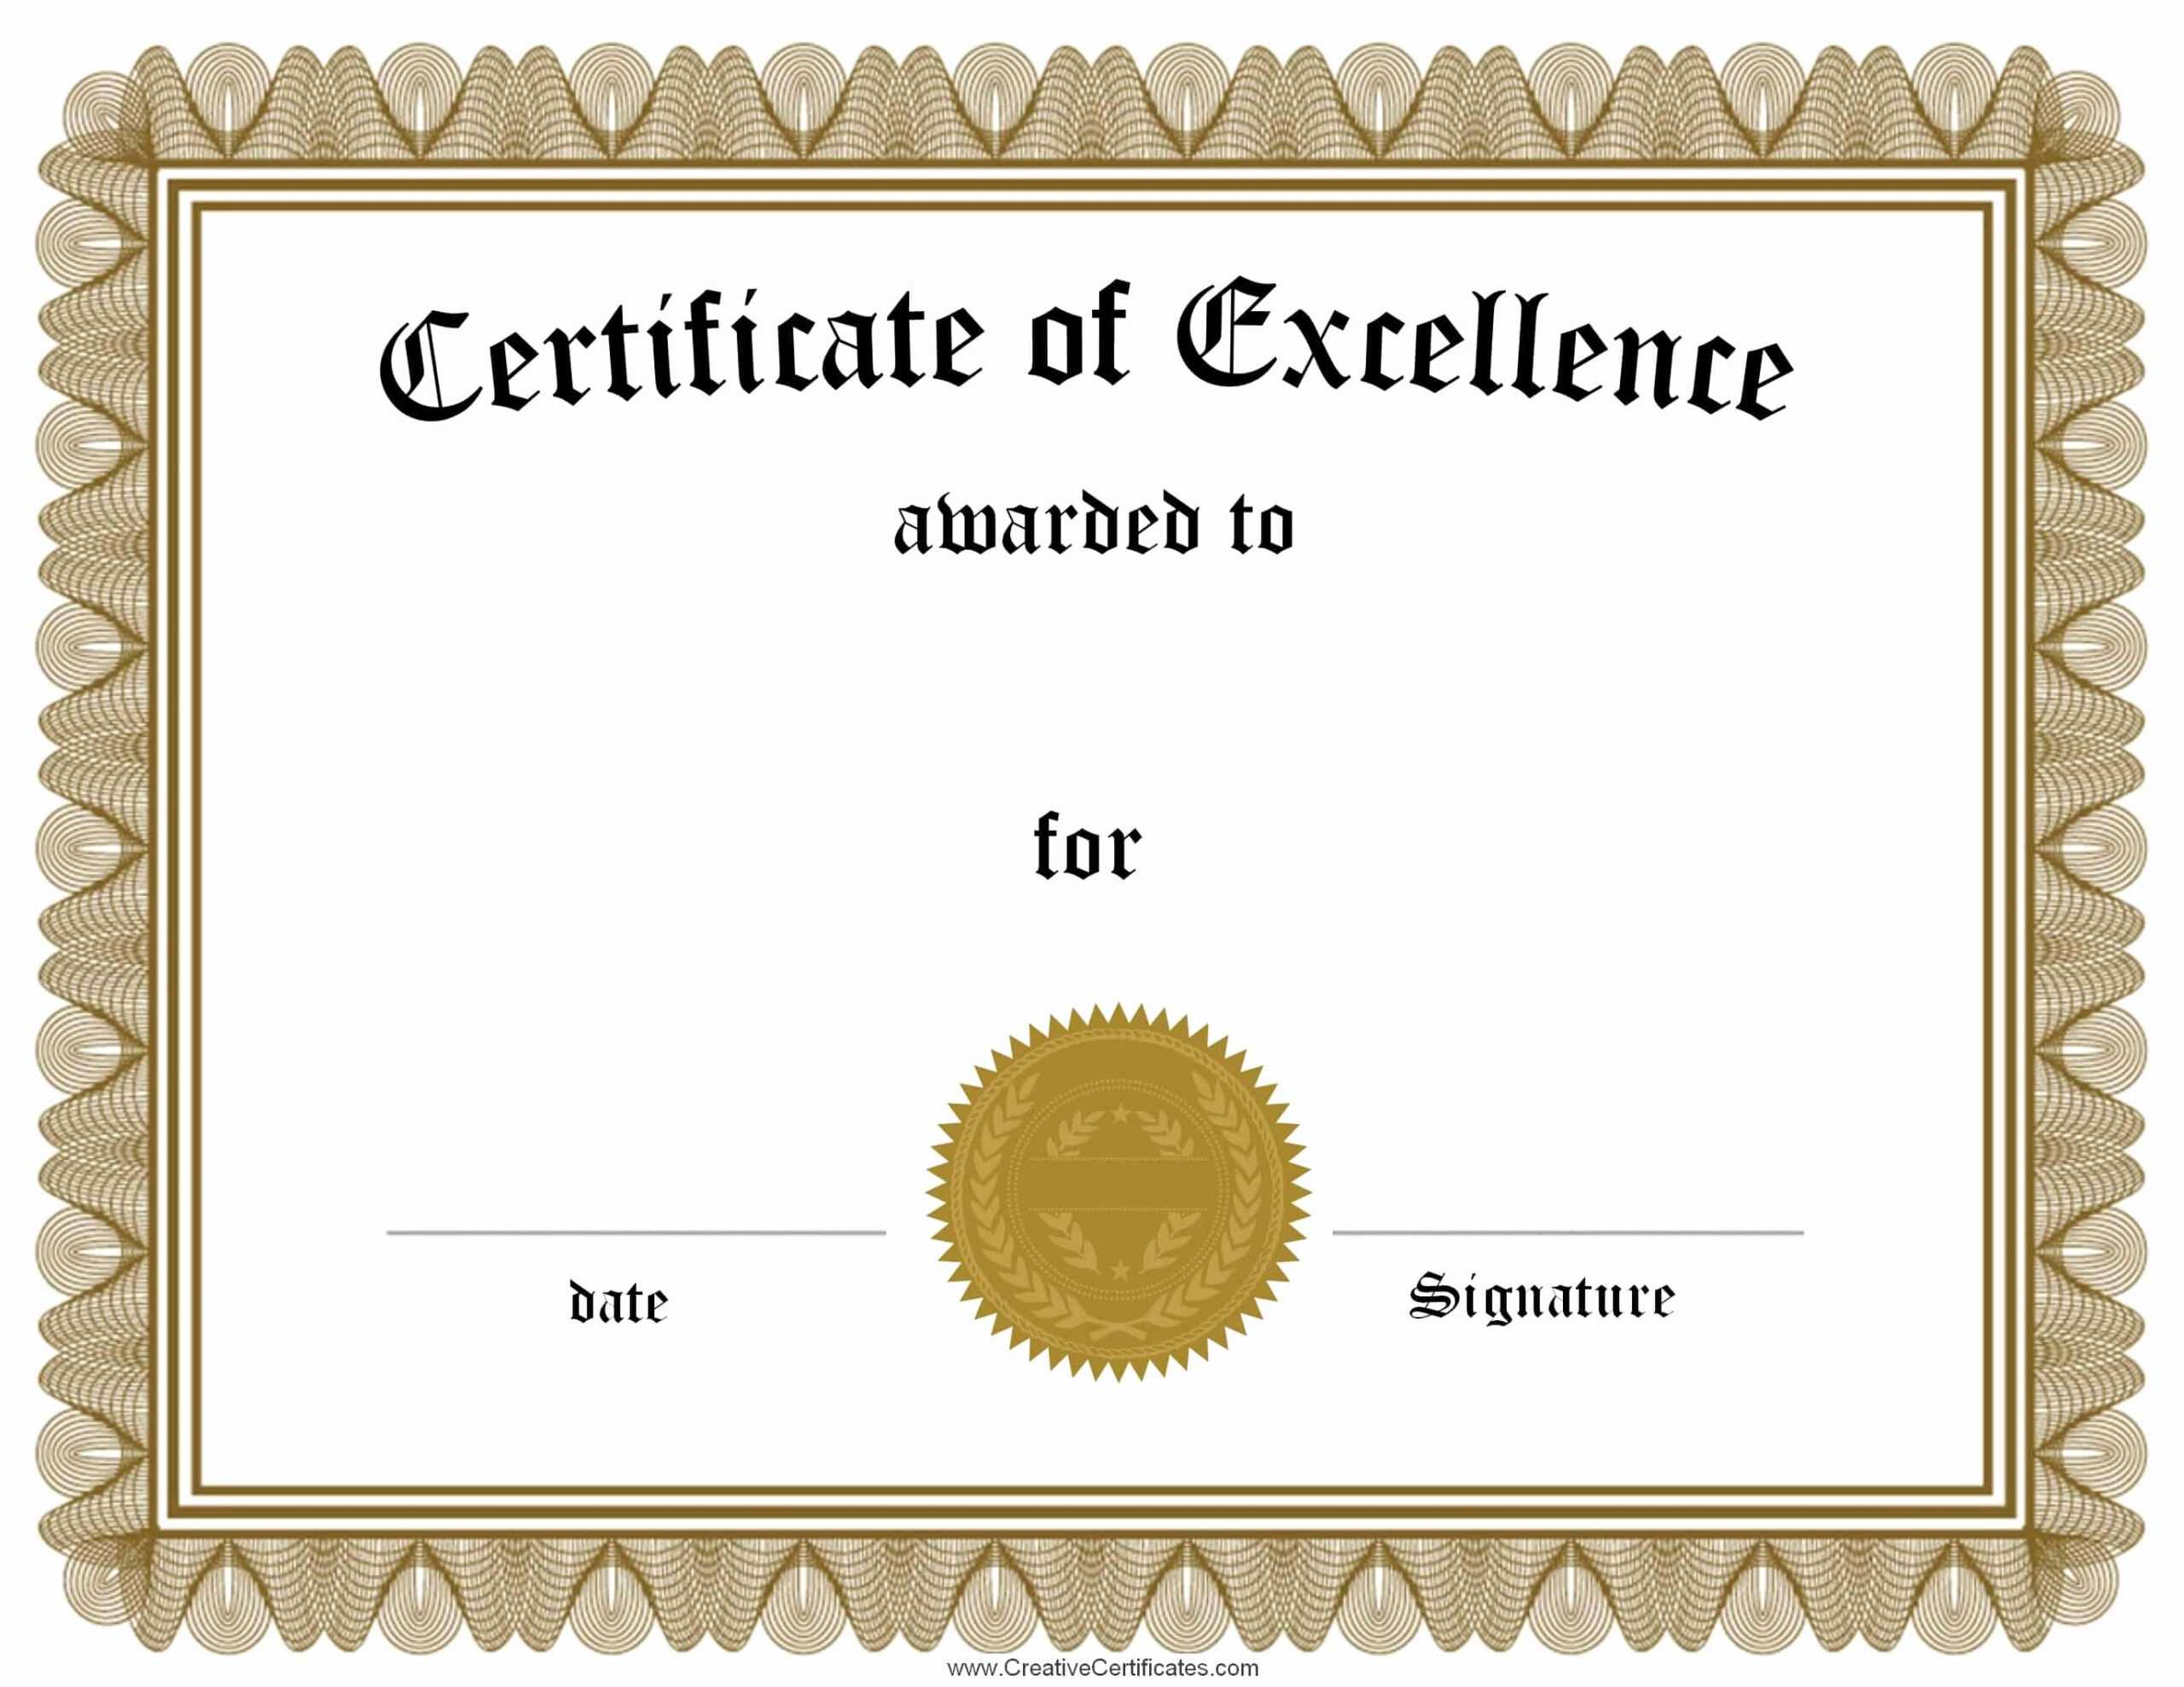 Academic Excellence Award Certificate Template New Free Intended For Academic Award Certificate Template